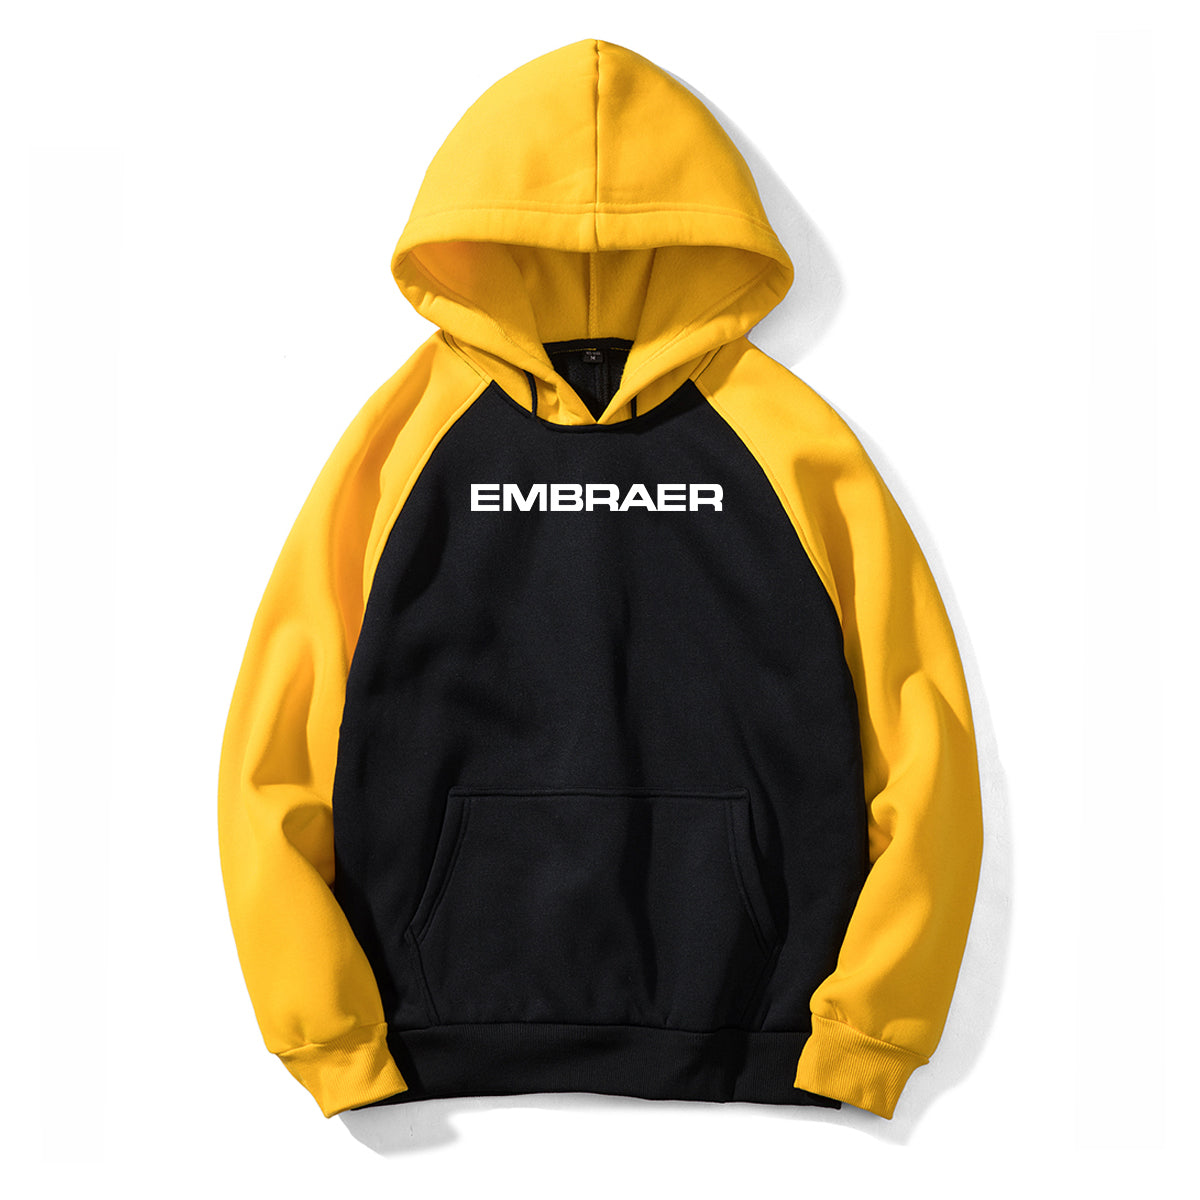 Embraer & Text Designed Colourful Hoodies